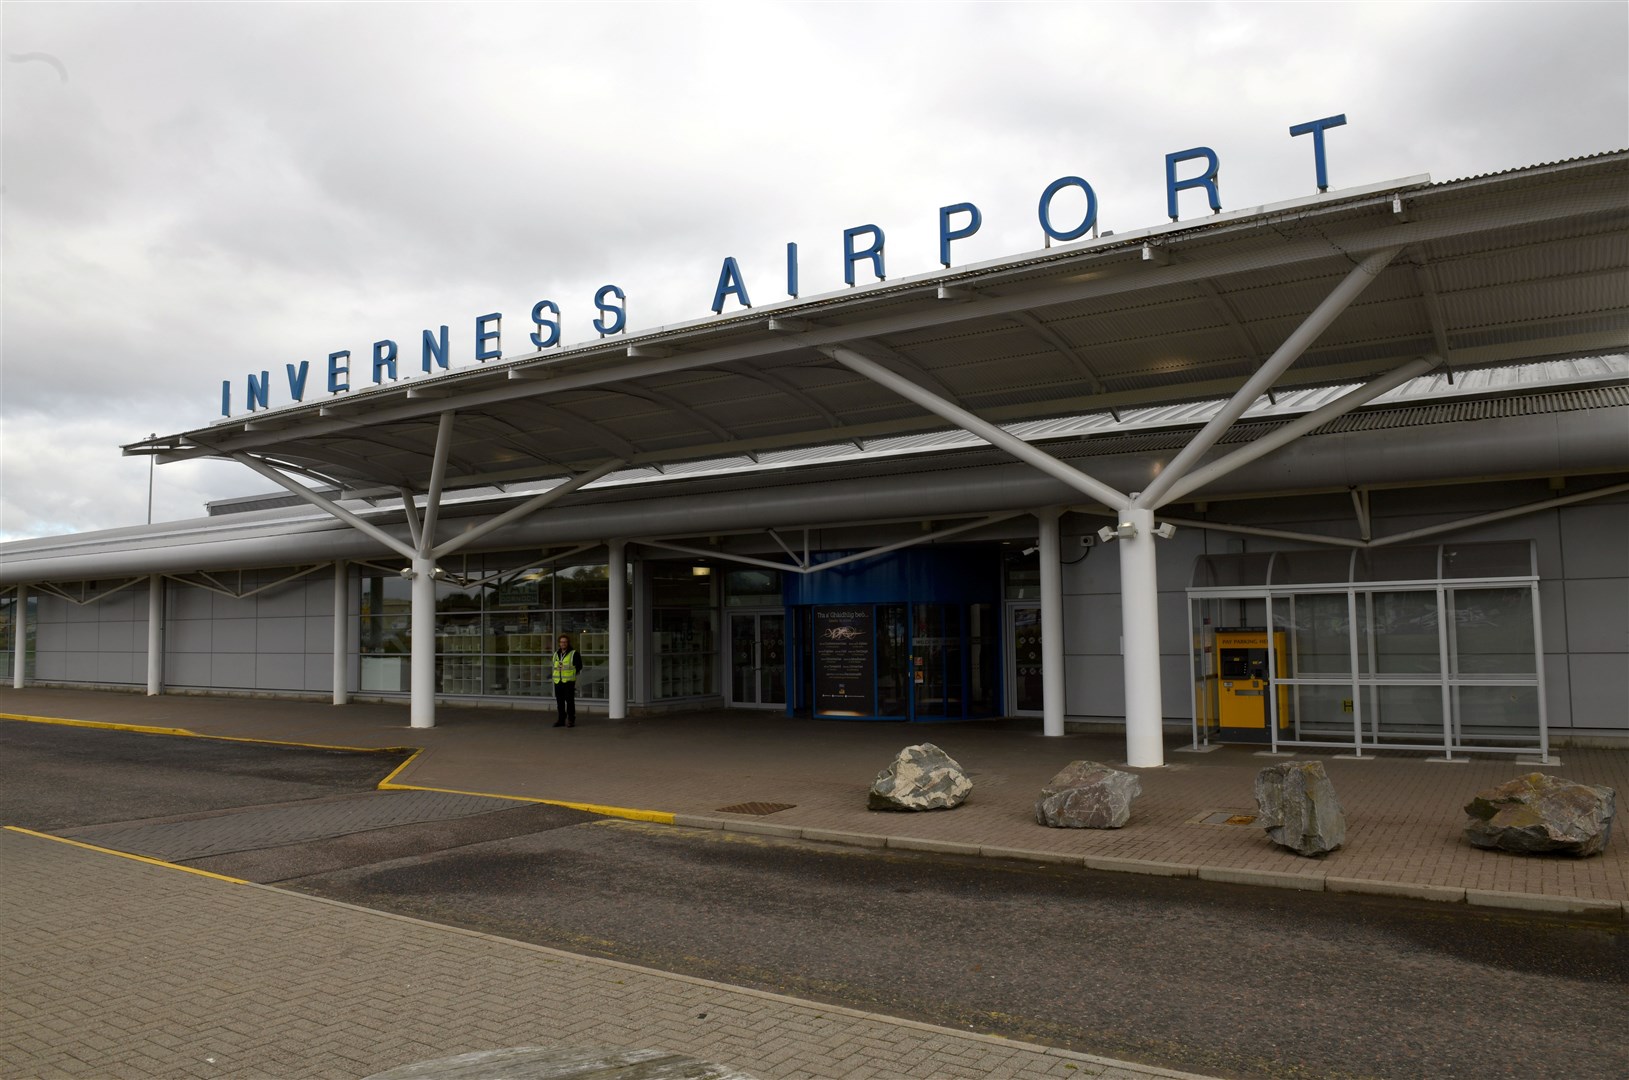 Two early morning flights from Inverness were cancelled today.